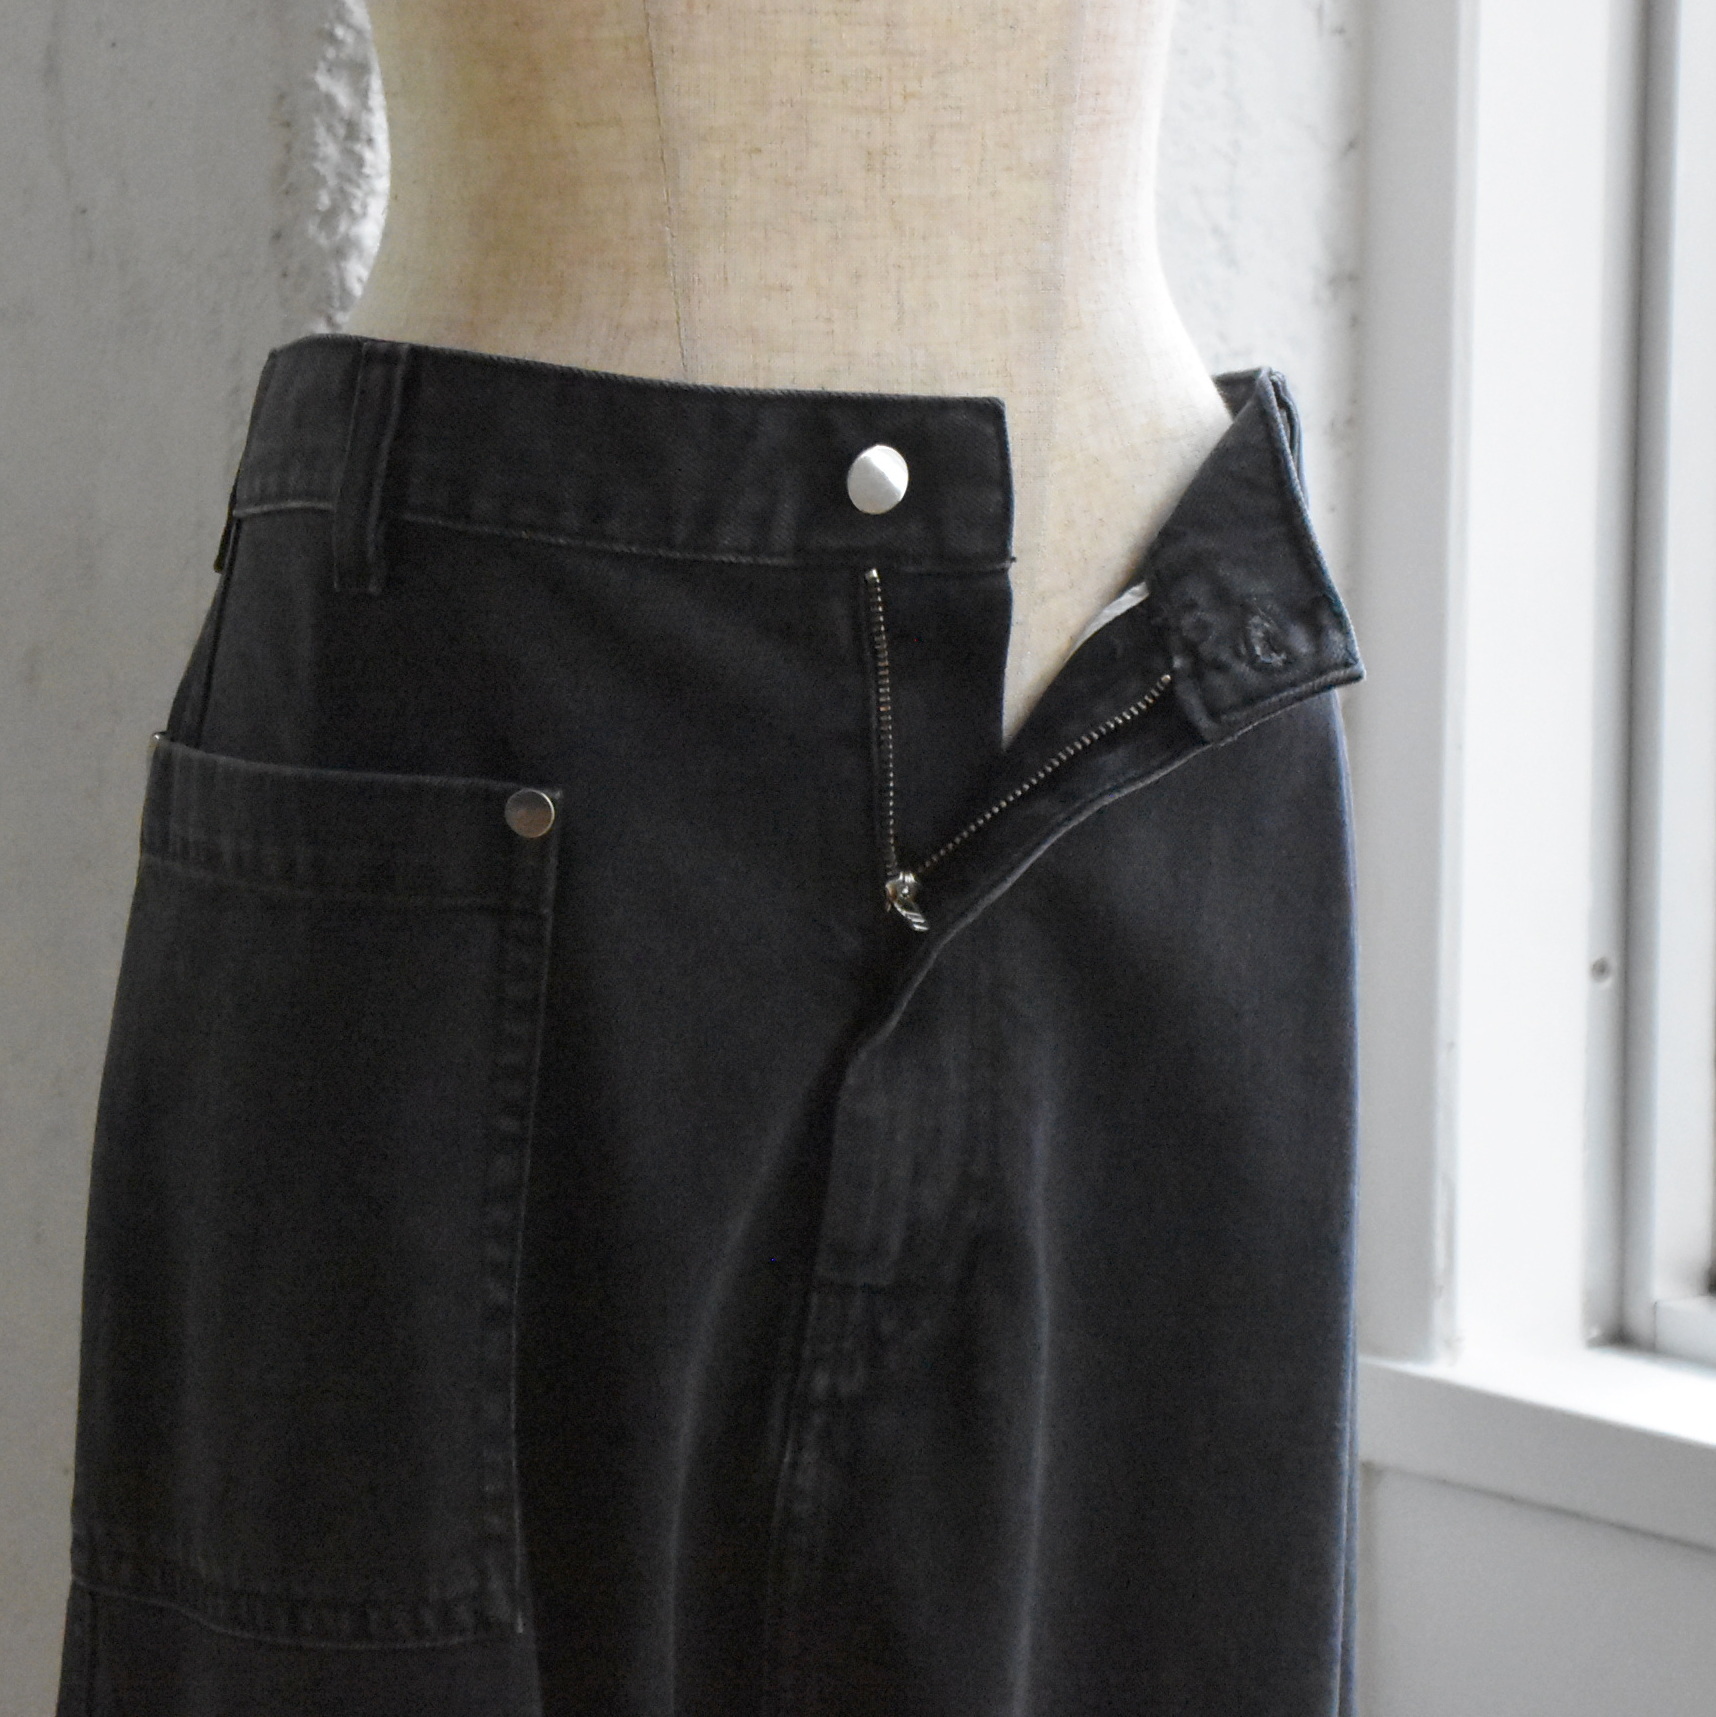 SOFIE D'HOORE(\tB[h[) / Jeans with thigh pockety2FWJz#PLATO-AA(10)